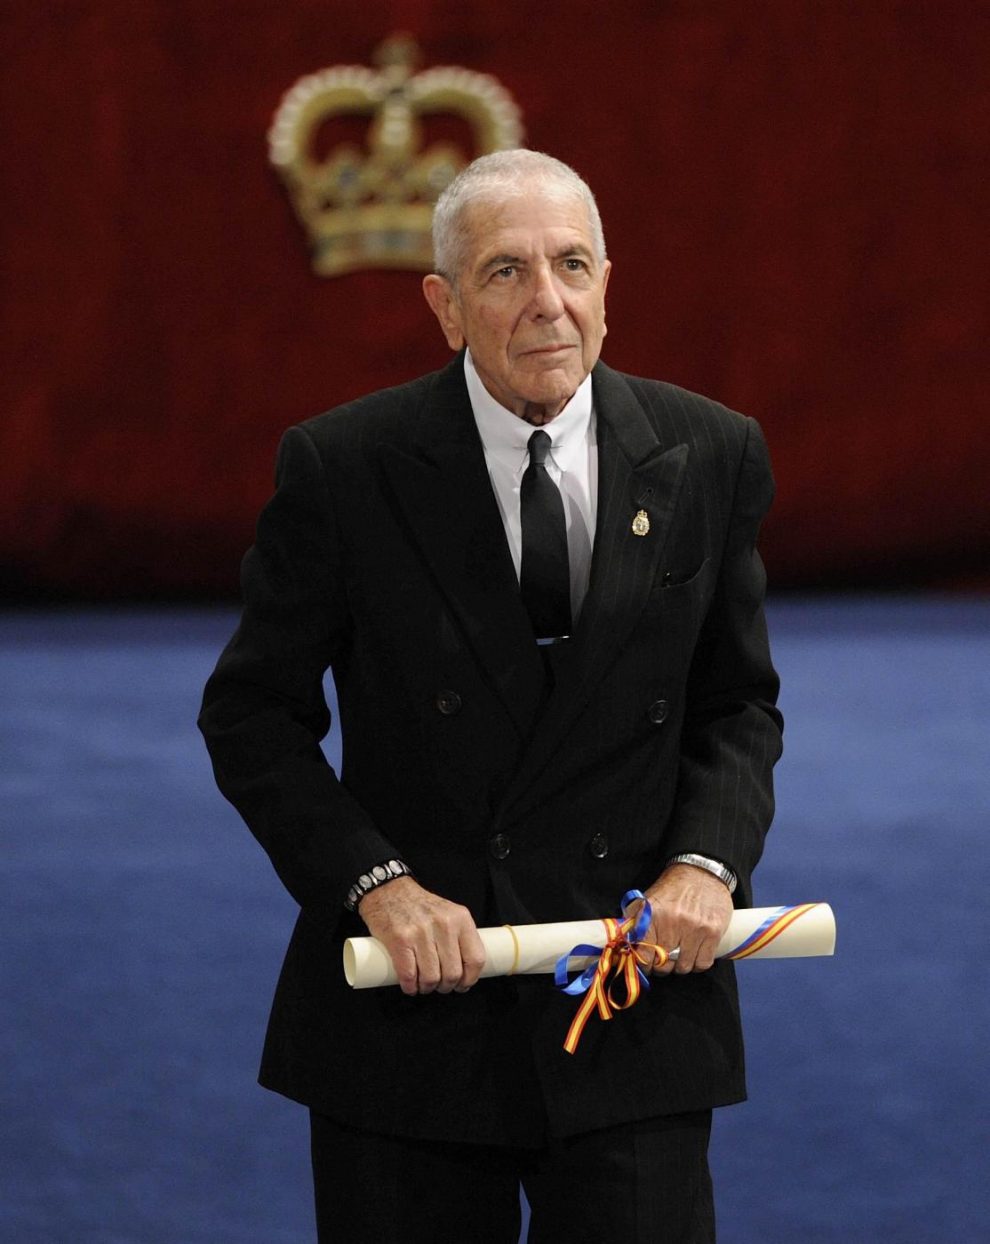 Canadian singer-songwriter Leonard Cohen acknowledges the applause from the audience after receiving the 2011 Prince of Asturias award for Letters from Spain’s Crown Prince Felipe during a ceremony at Campoamor theatre in Oviedo, northern Spain on October 21, 2011. REUTERS/Eloy Alonso/File Photo